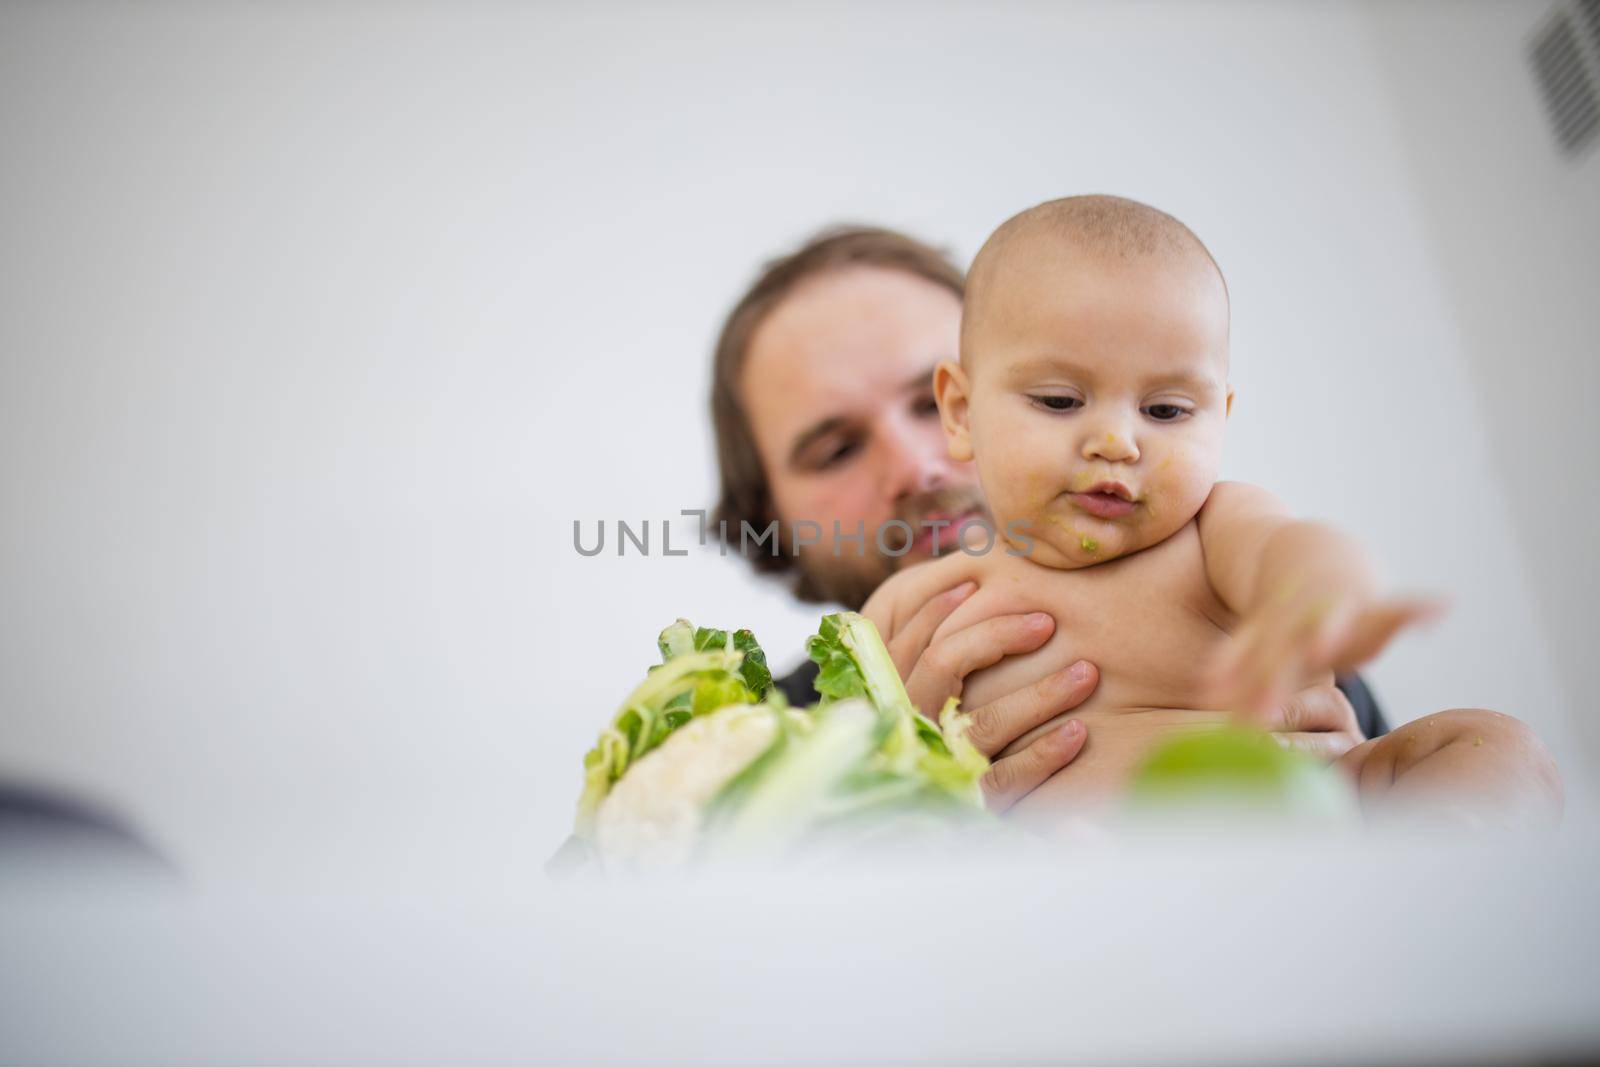 Father lovingly holding and kissing his baby daughter above a table by Kanelbulle